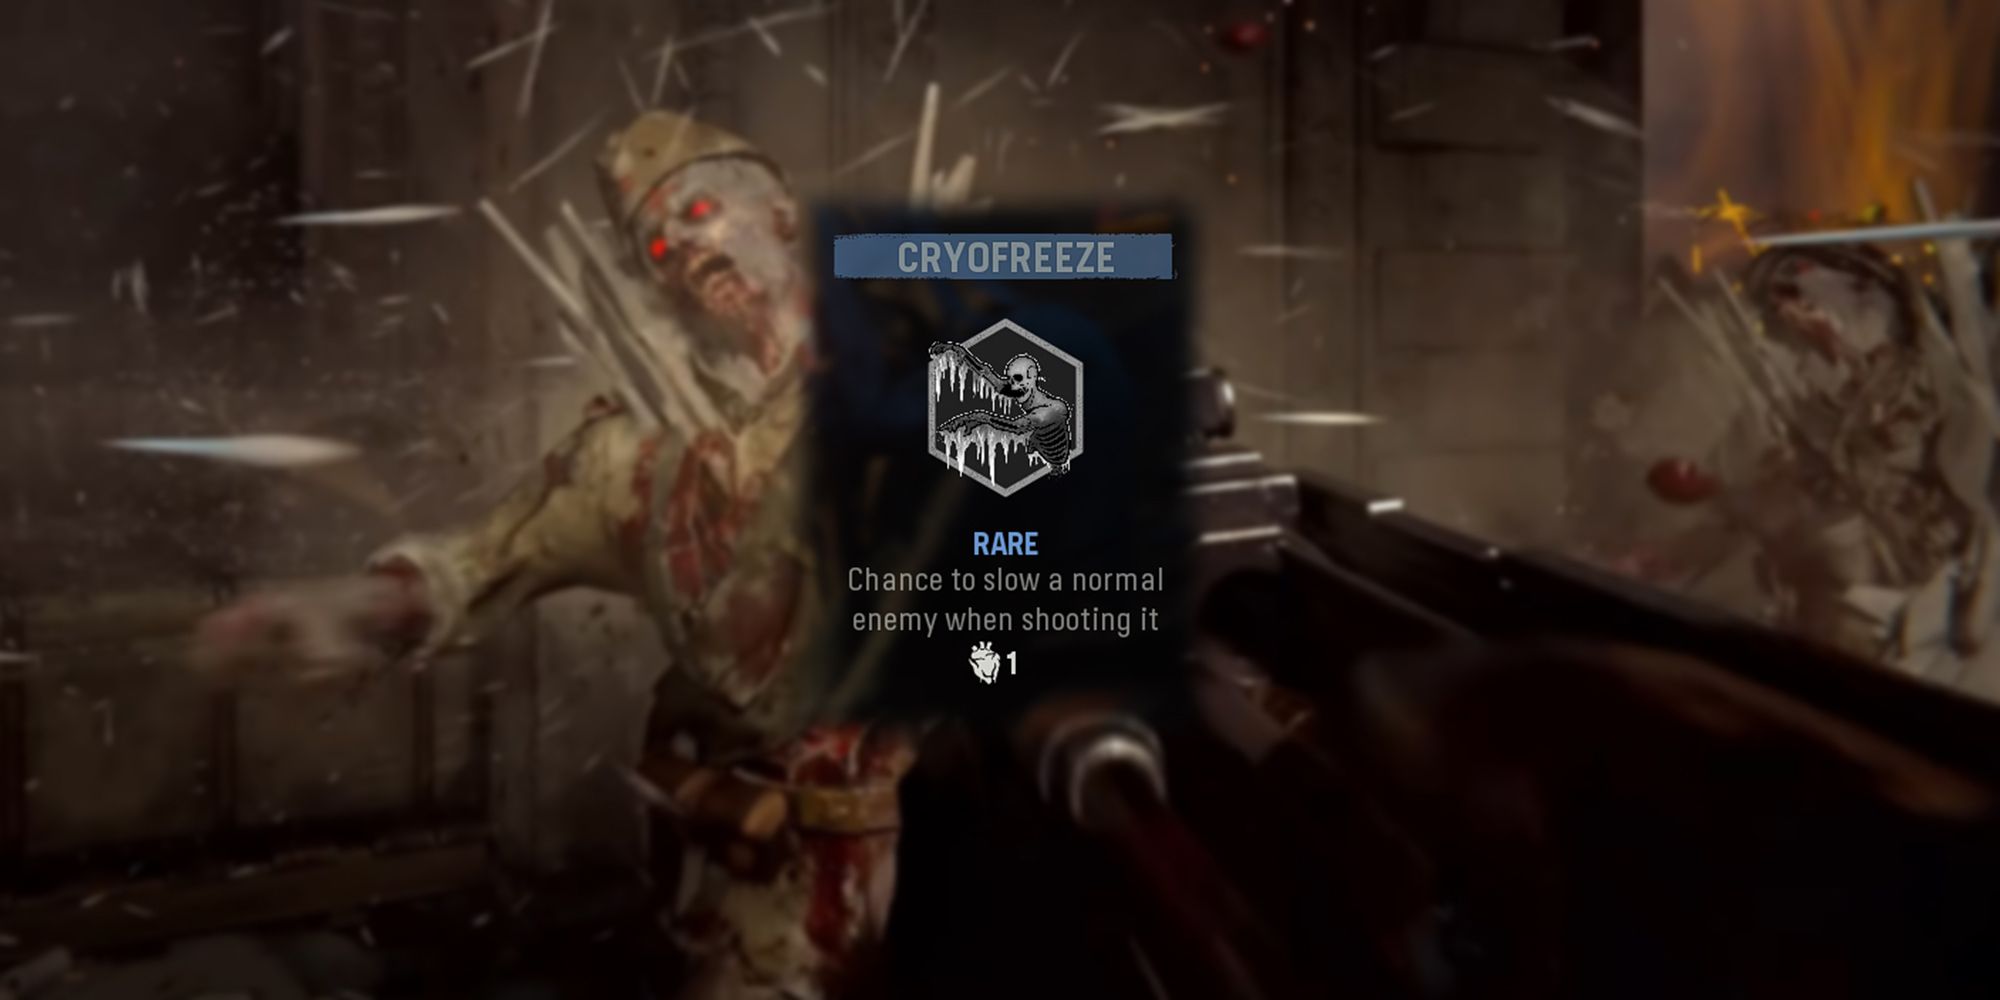 Call of Duty Vanguard Zombies - Cryofreeze Description In-Game Overlaid On Image Of Zombie Frozen Over